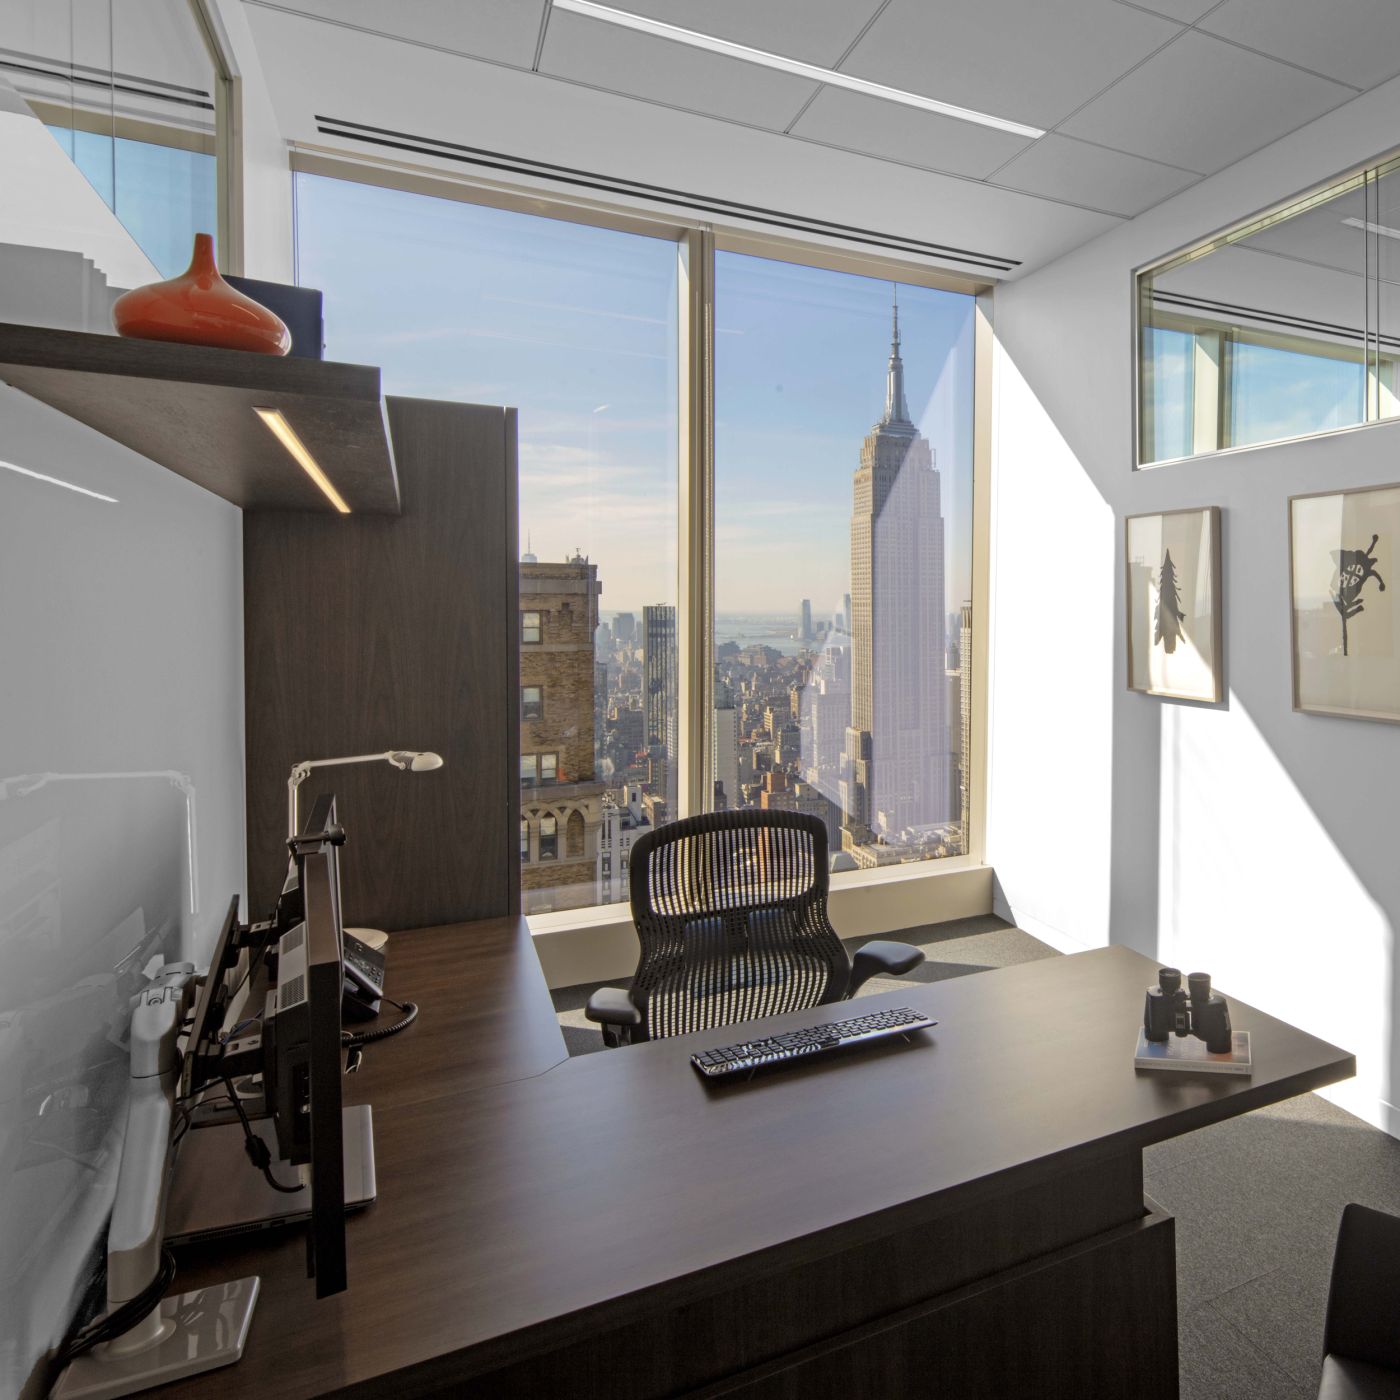 NEW MILLENNIA private office with a stunning NYC view.